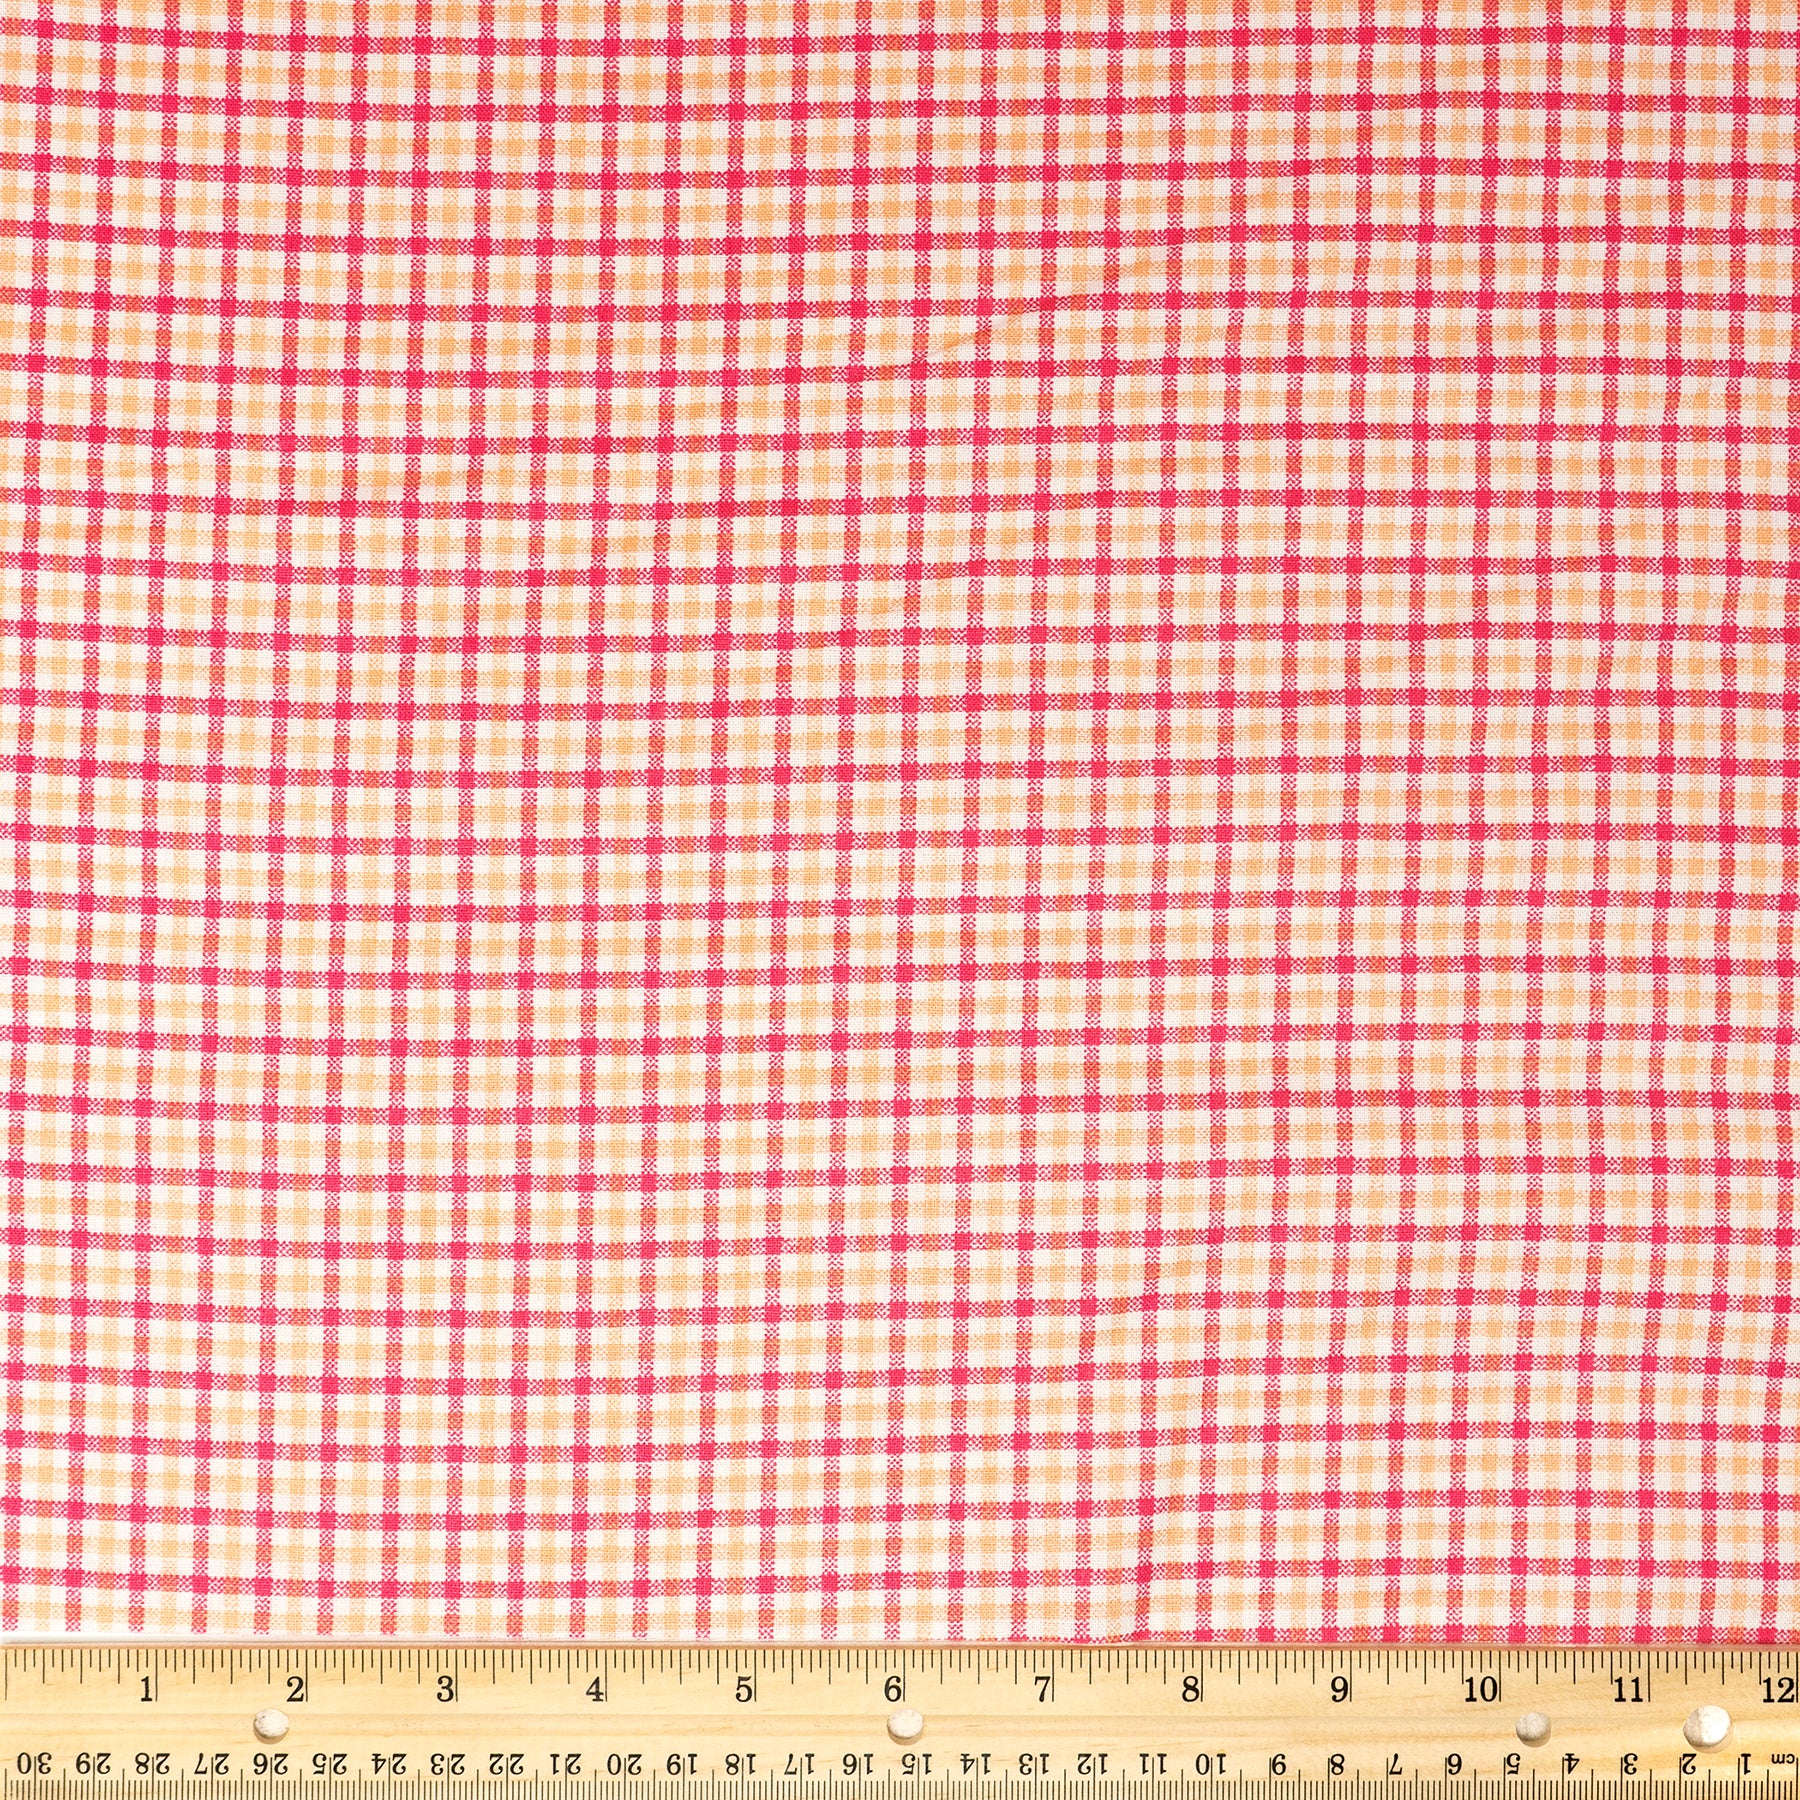 Waverly Inspirations Cotton 44" Plaid Coral Color Sewing Fabric by the Yard